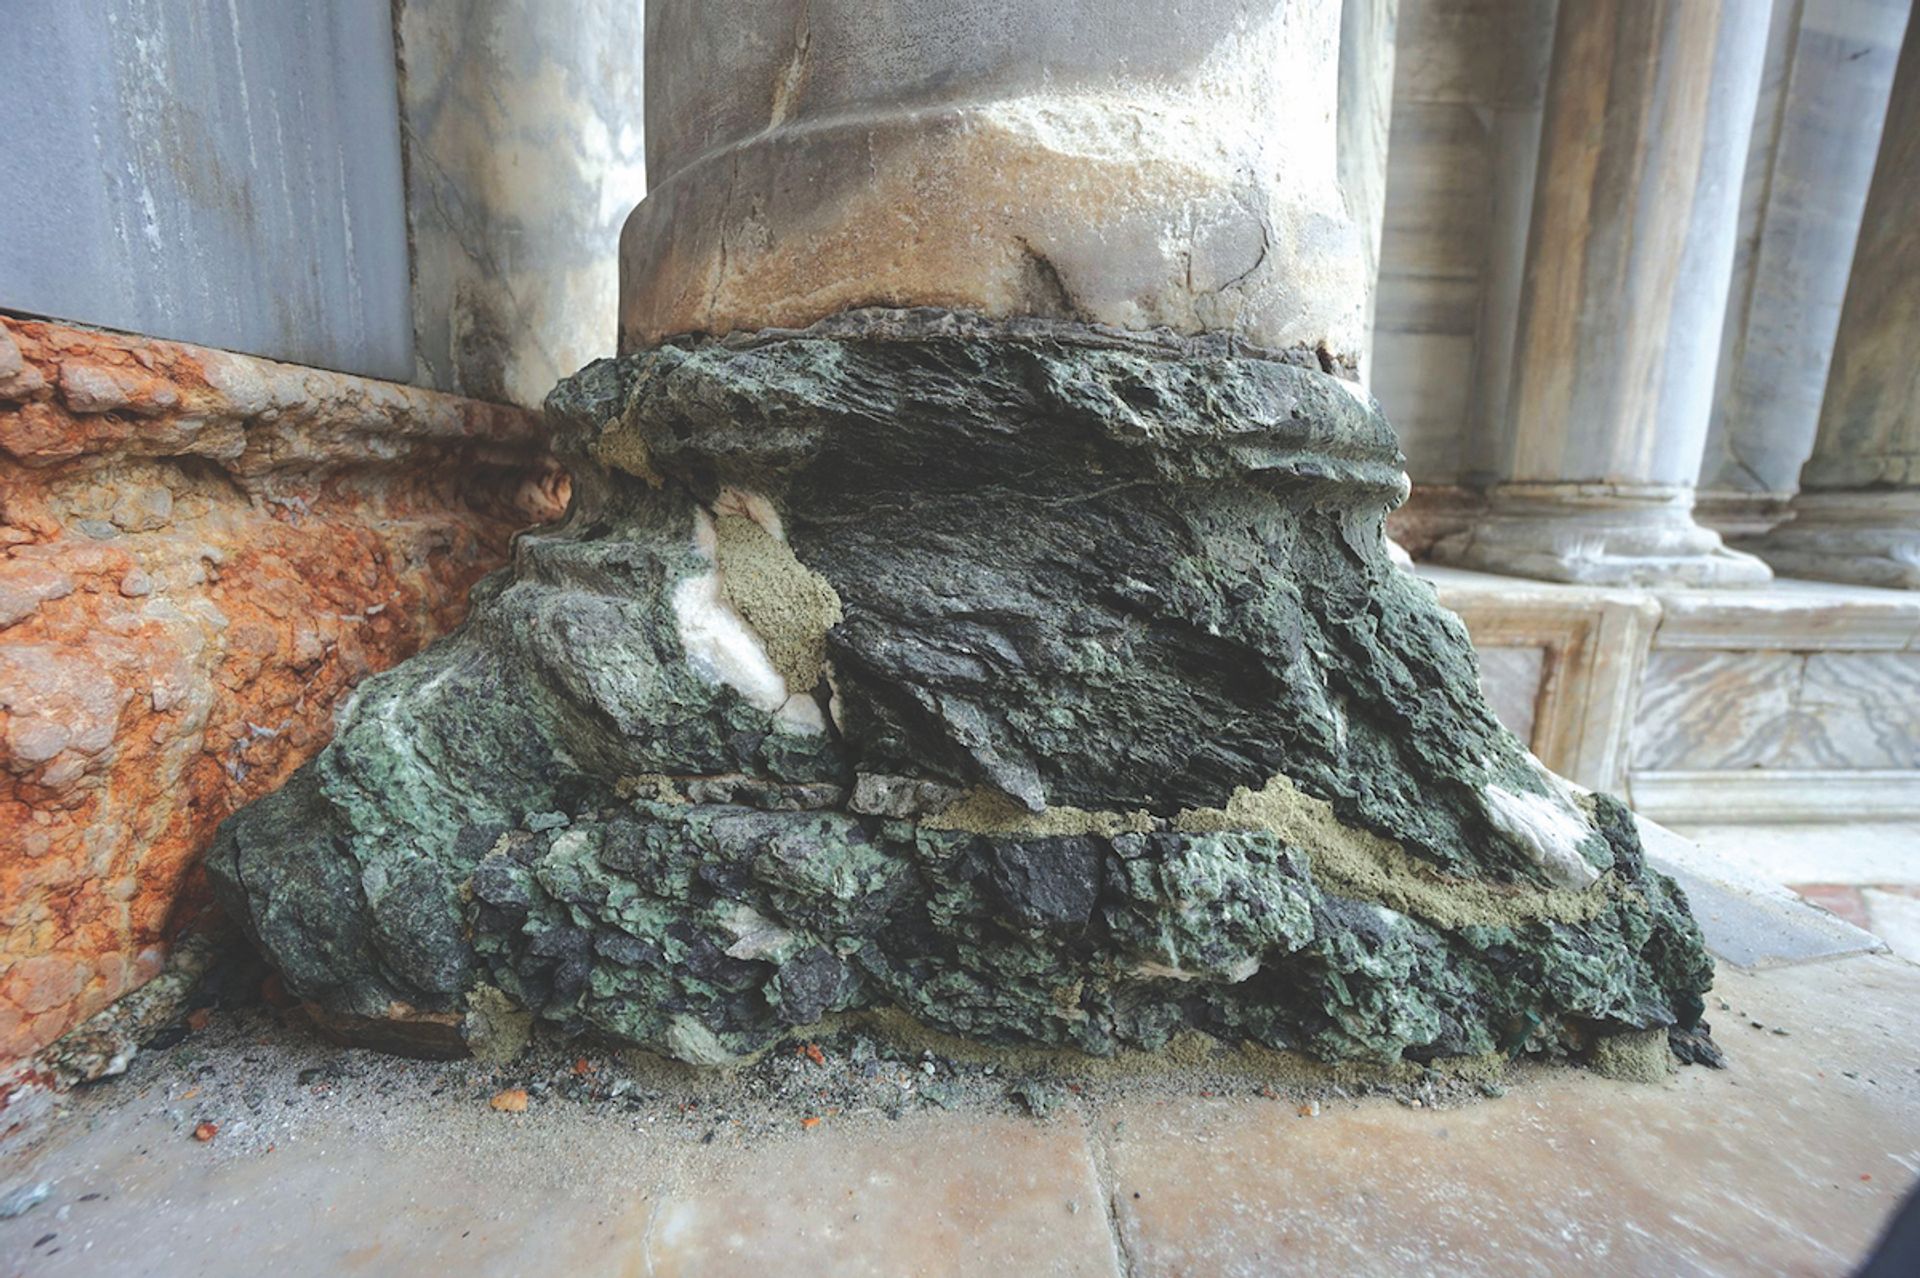 The effect of mineral salts in floodwater on the basilica’s marble columns Andrea Merola